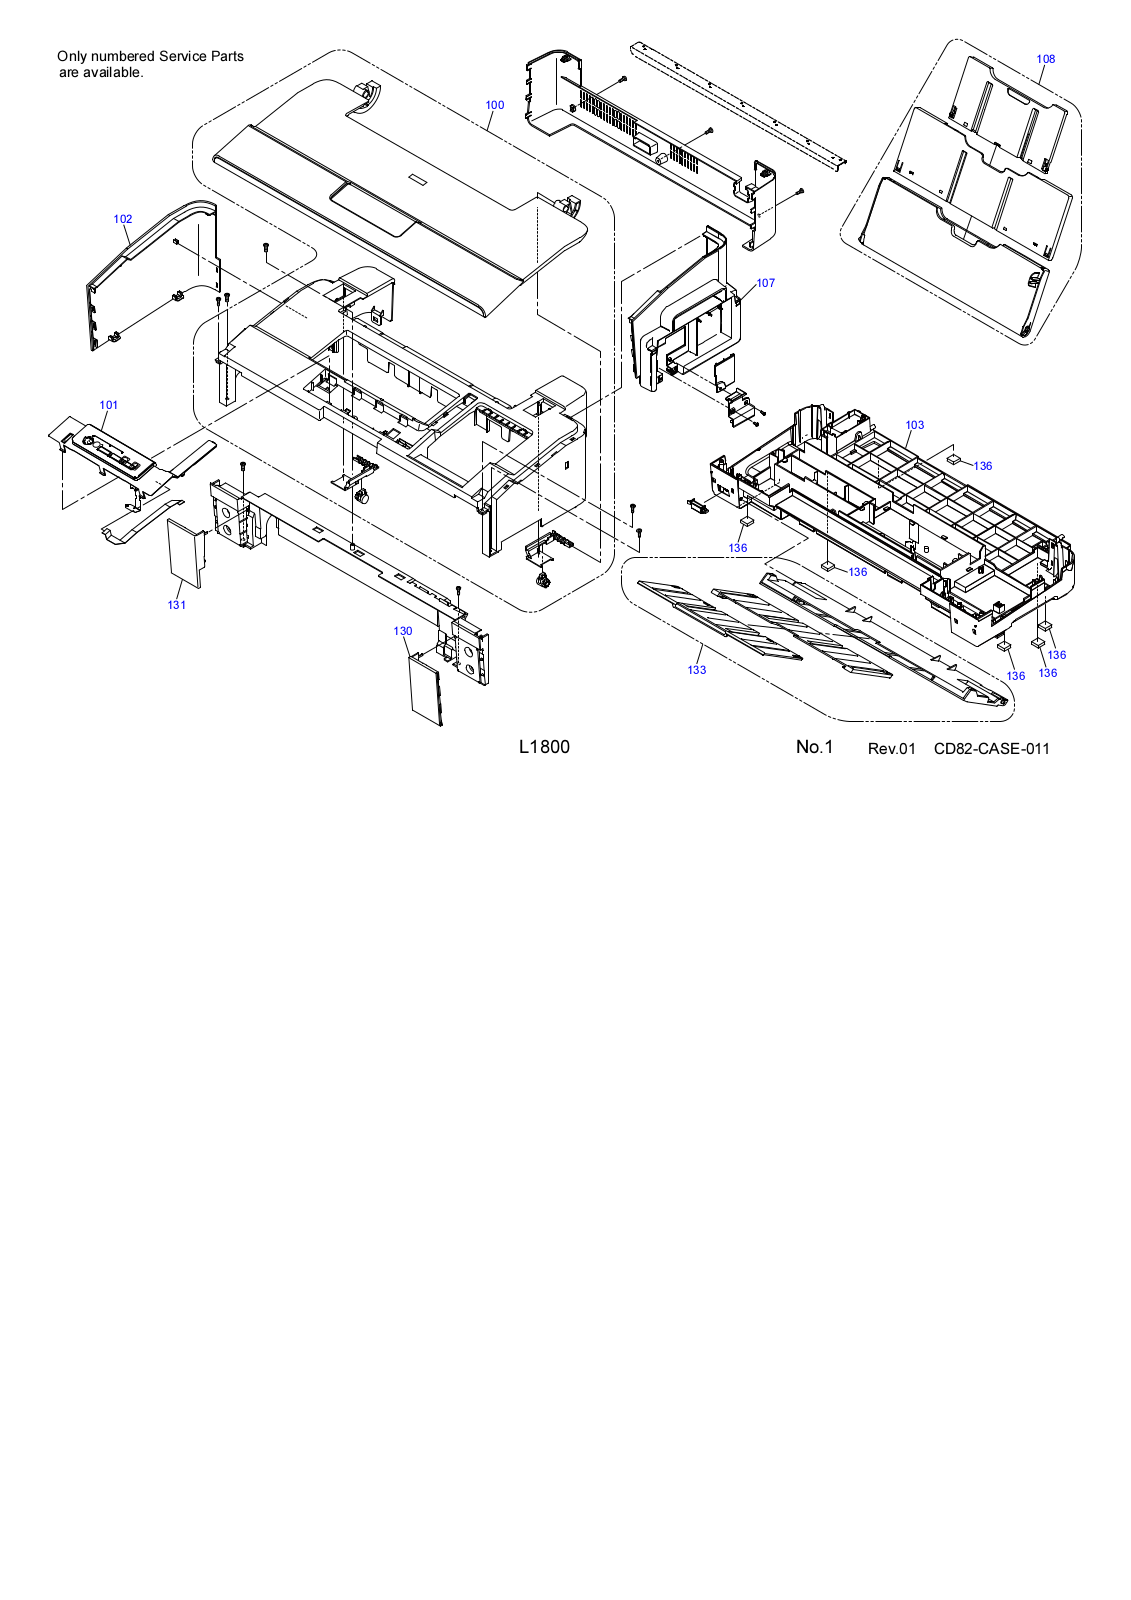 Epson L1800 Exploded Diagrams 1